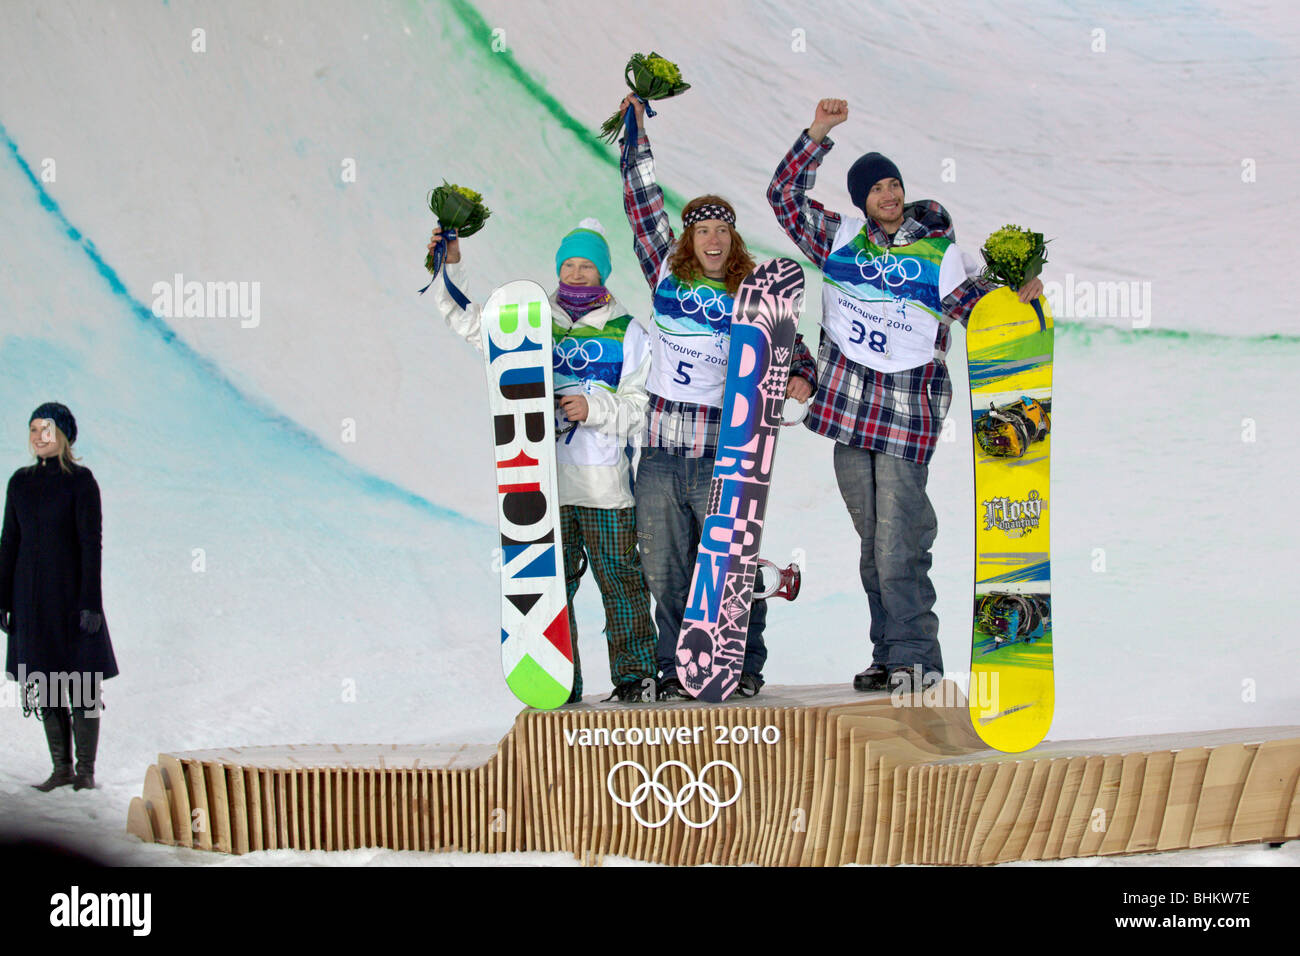 Shaun White (USA), wins the gold medal in the Men's Snowboard Halfpipe event at the 2010 Olympic Winter Games Stock Photo